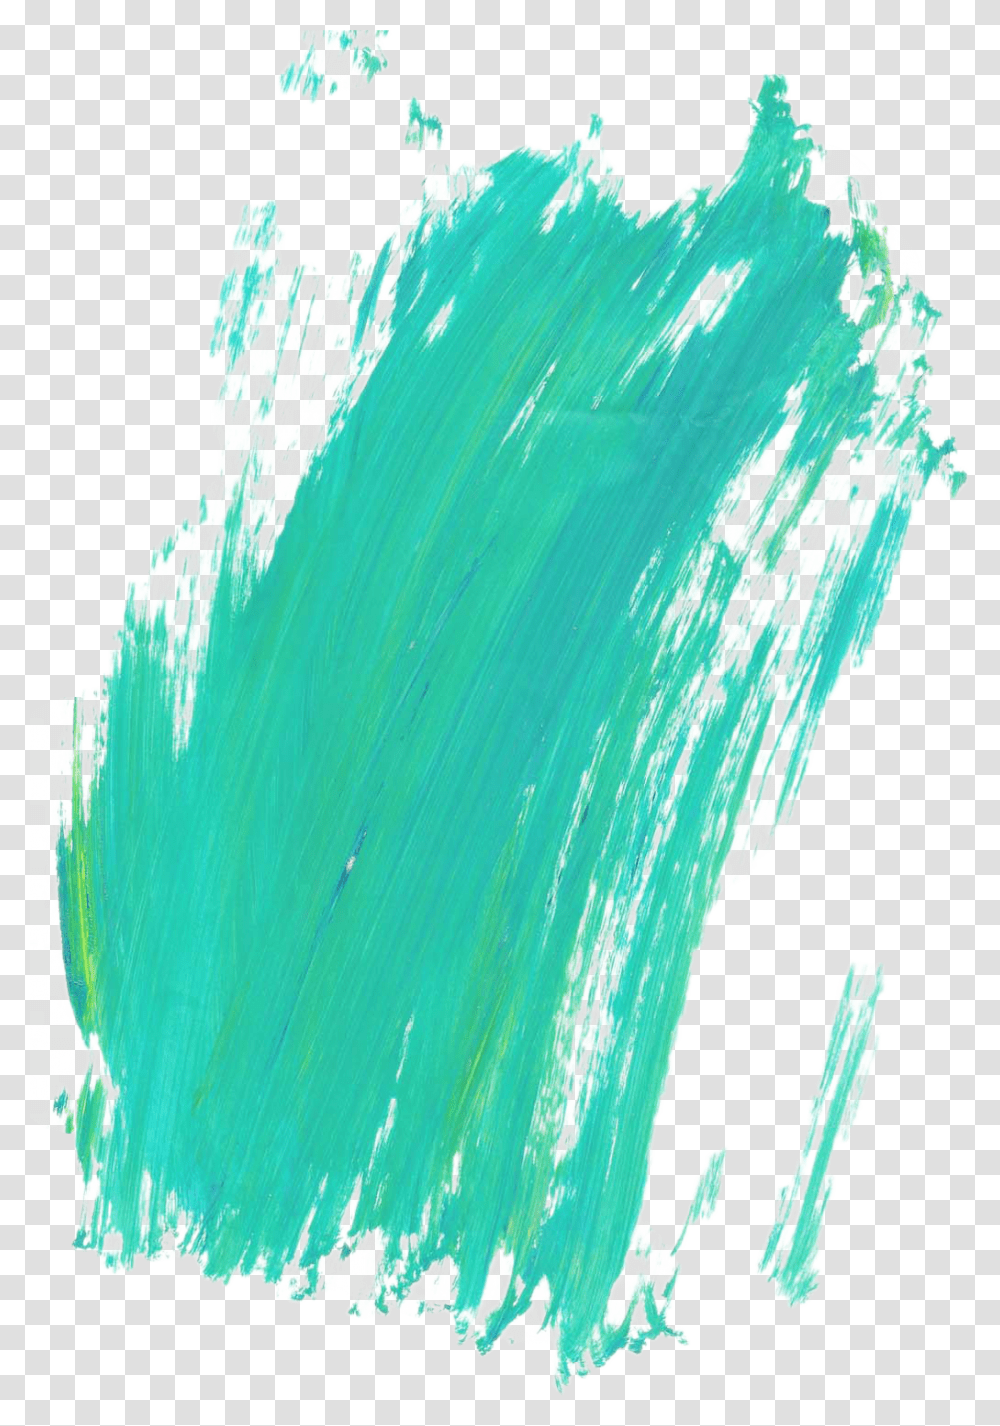 Blue Green Stroke Ink Stain Paint Freetoedit Paint Brush Stroke, Sea, Outdoors, Water, Nature Transparent Png